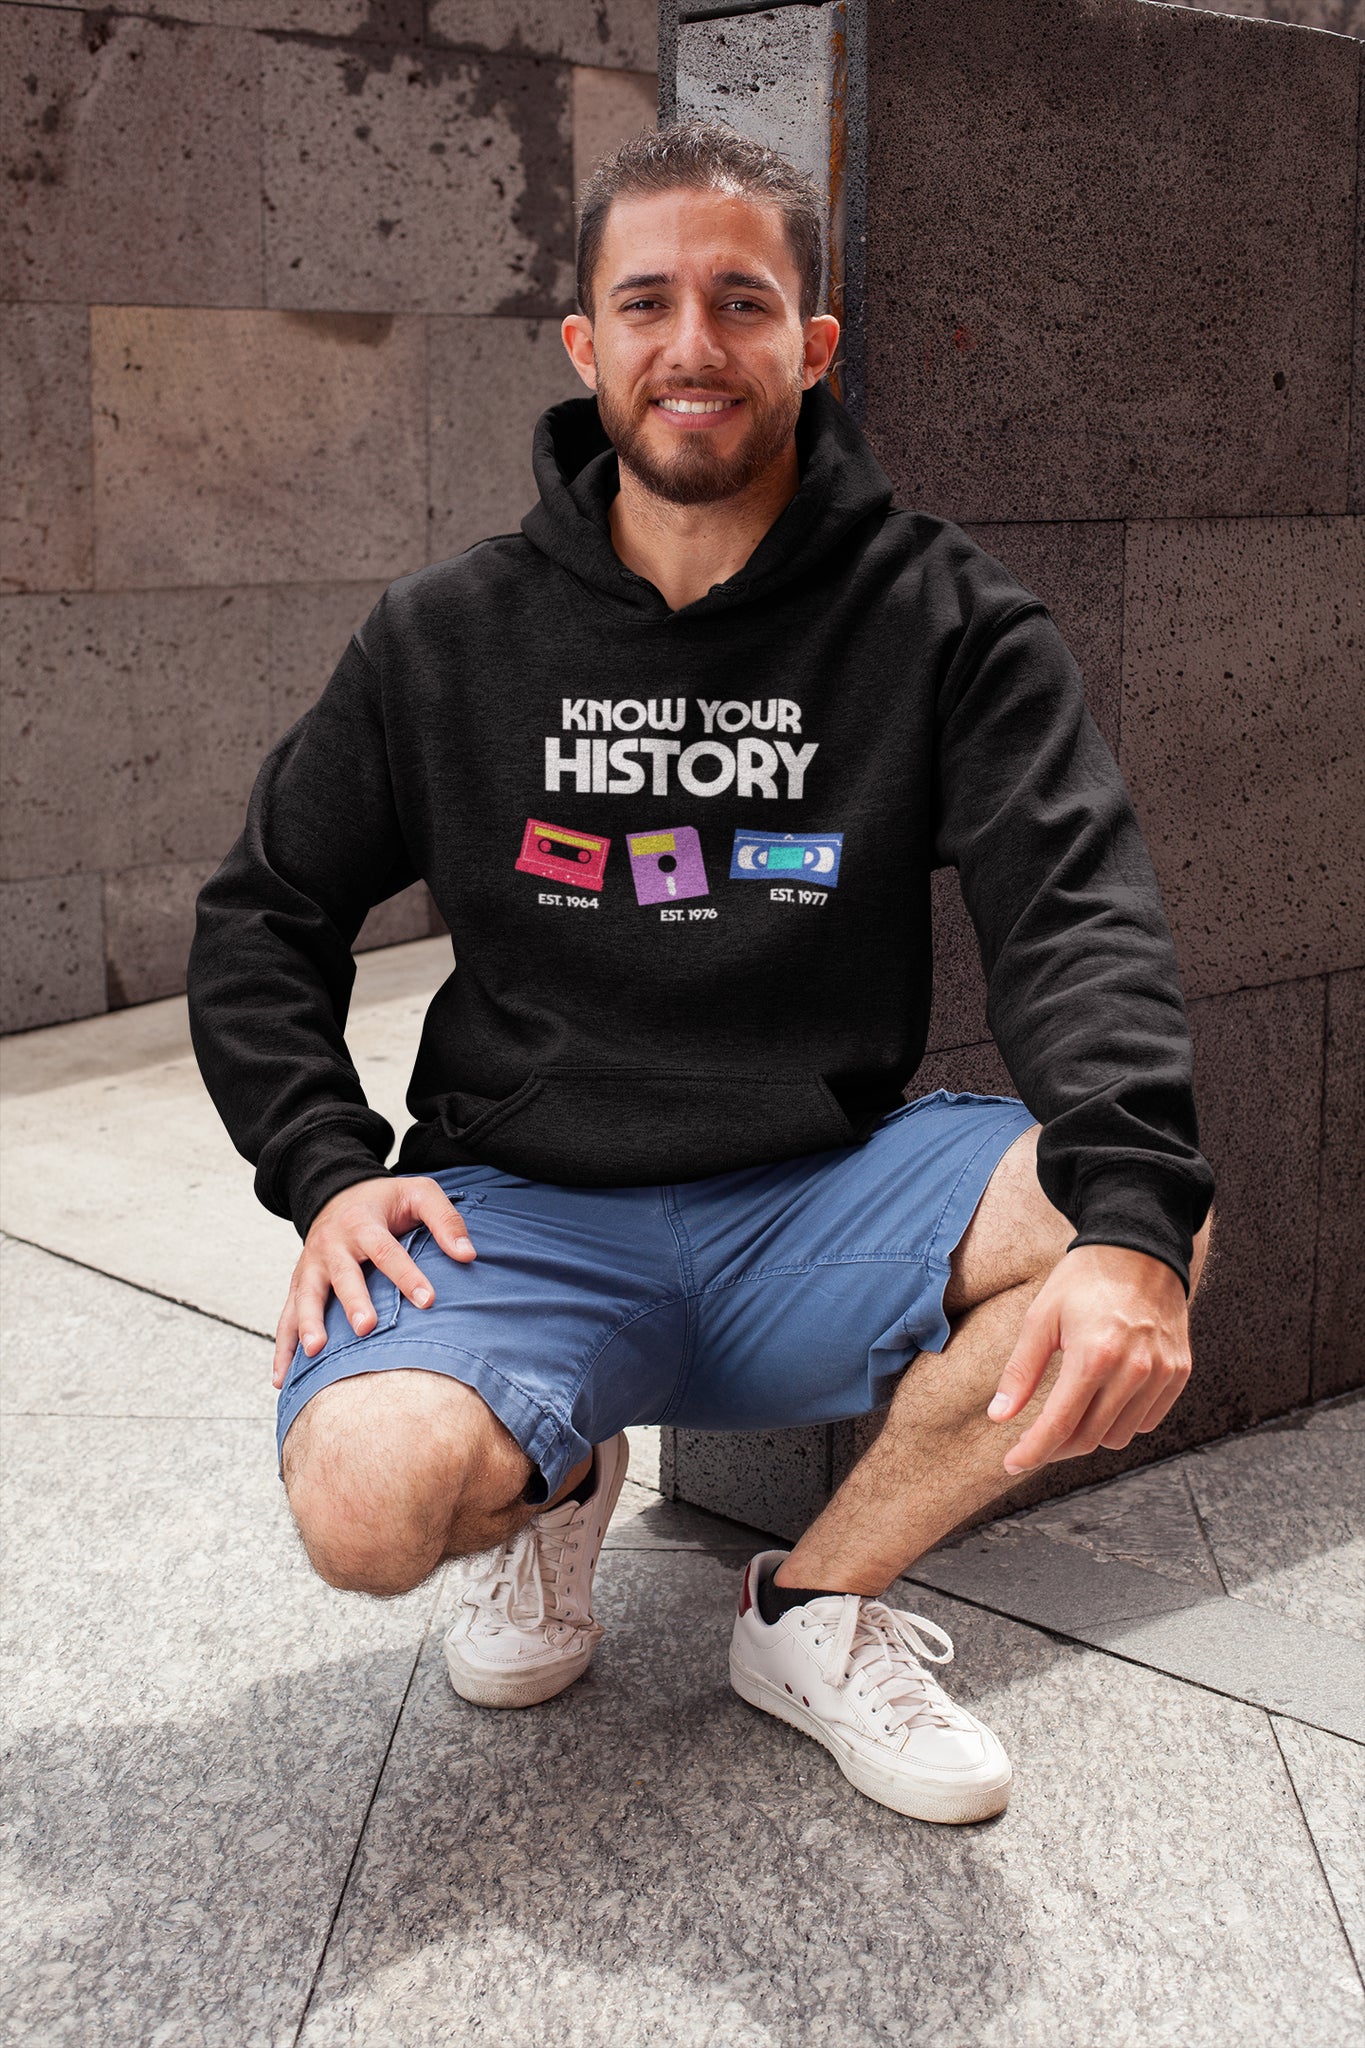 Know Your History Unisex Hoodies